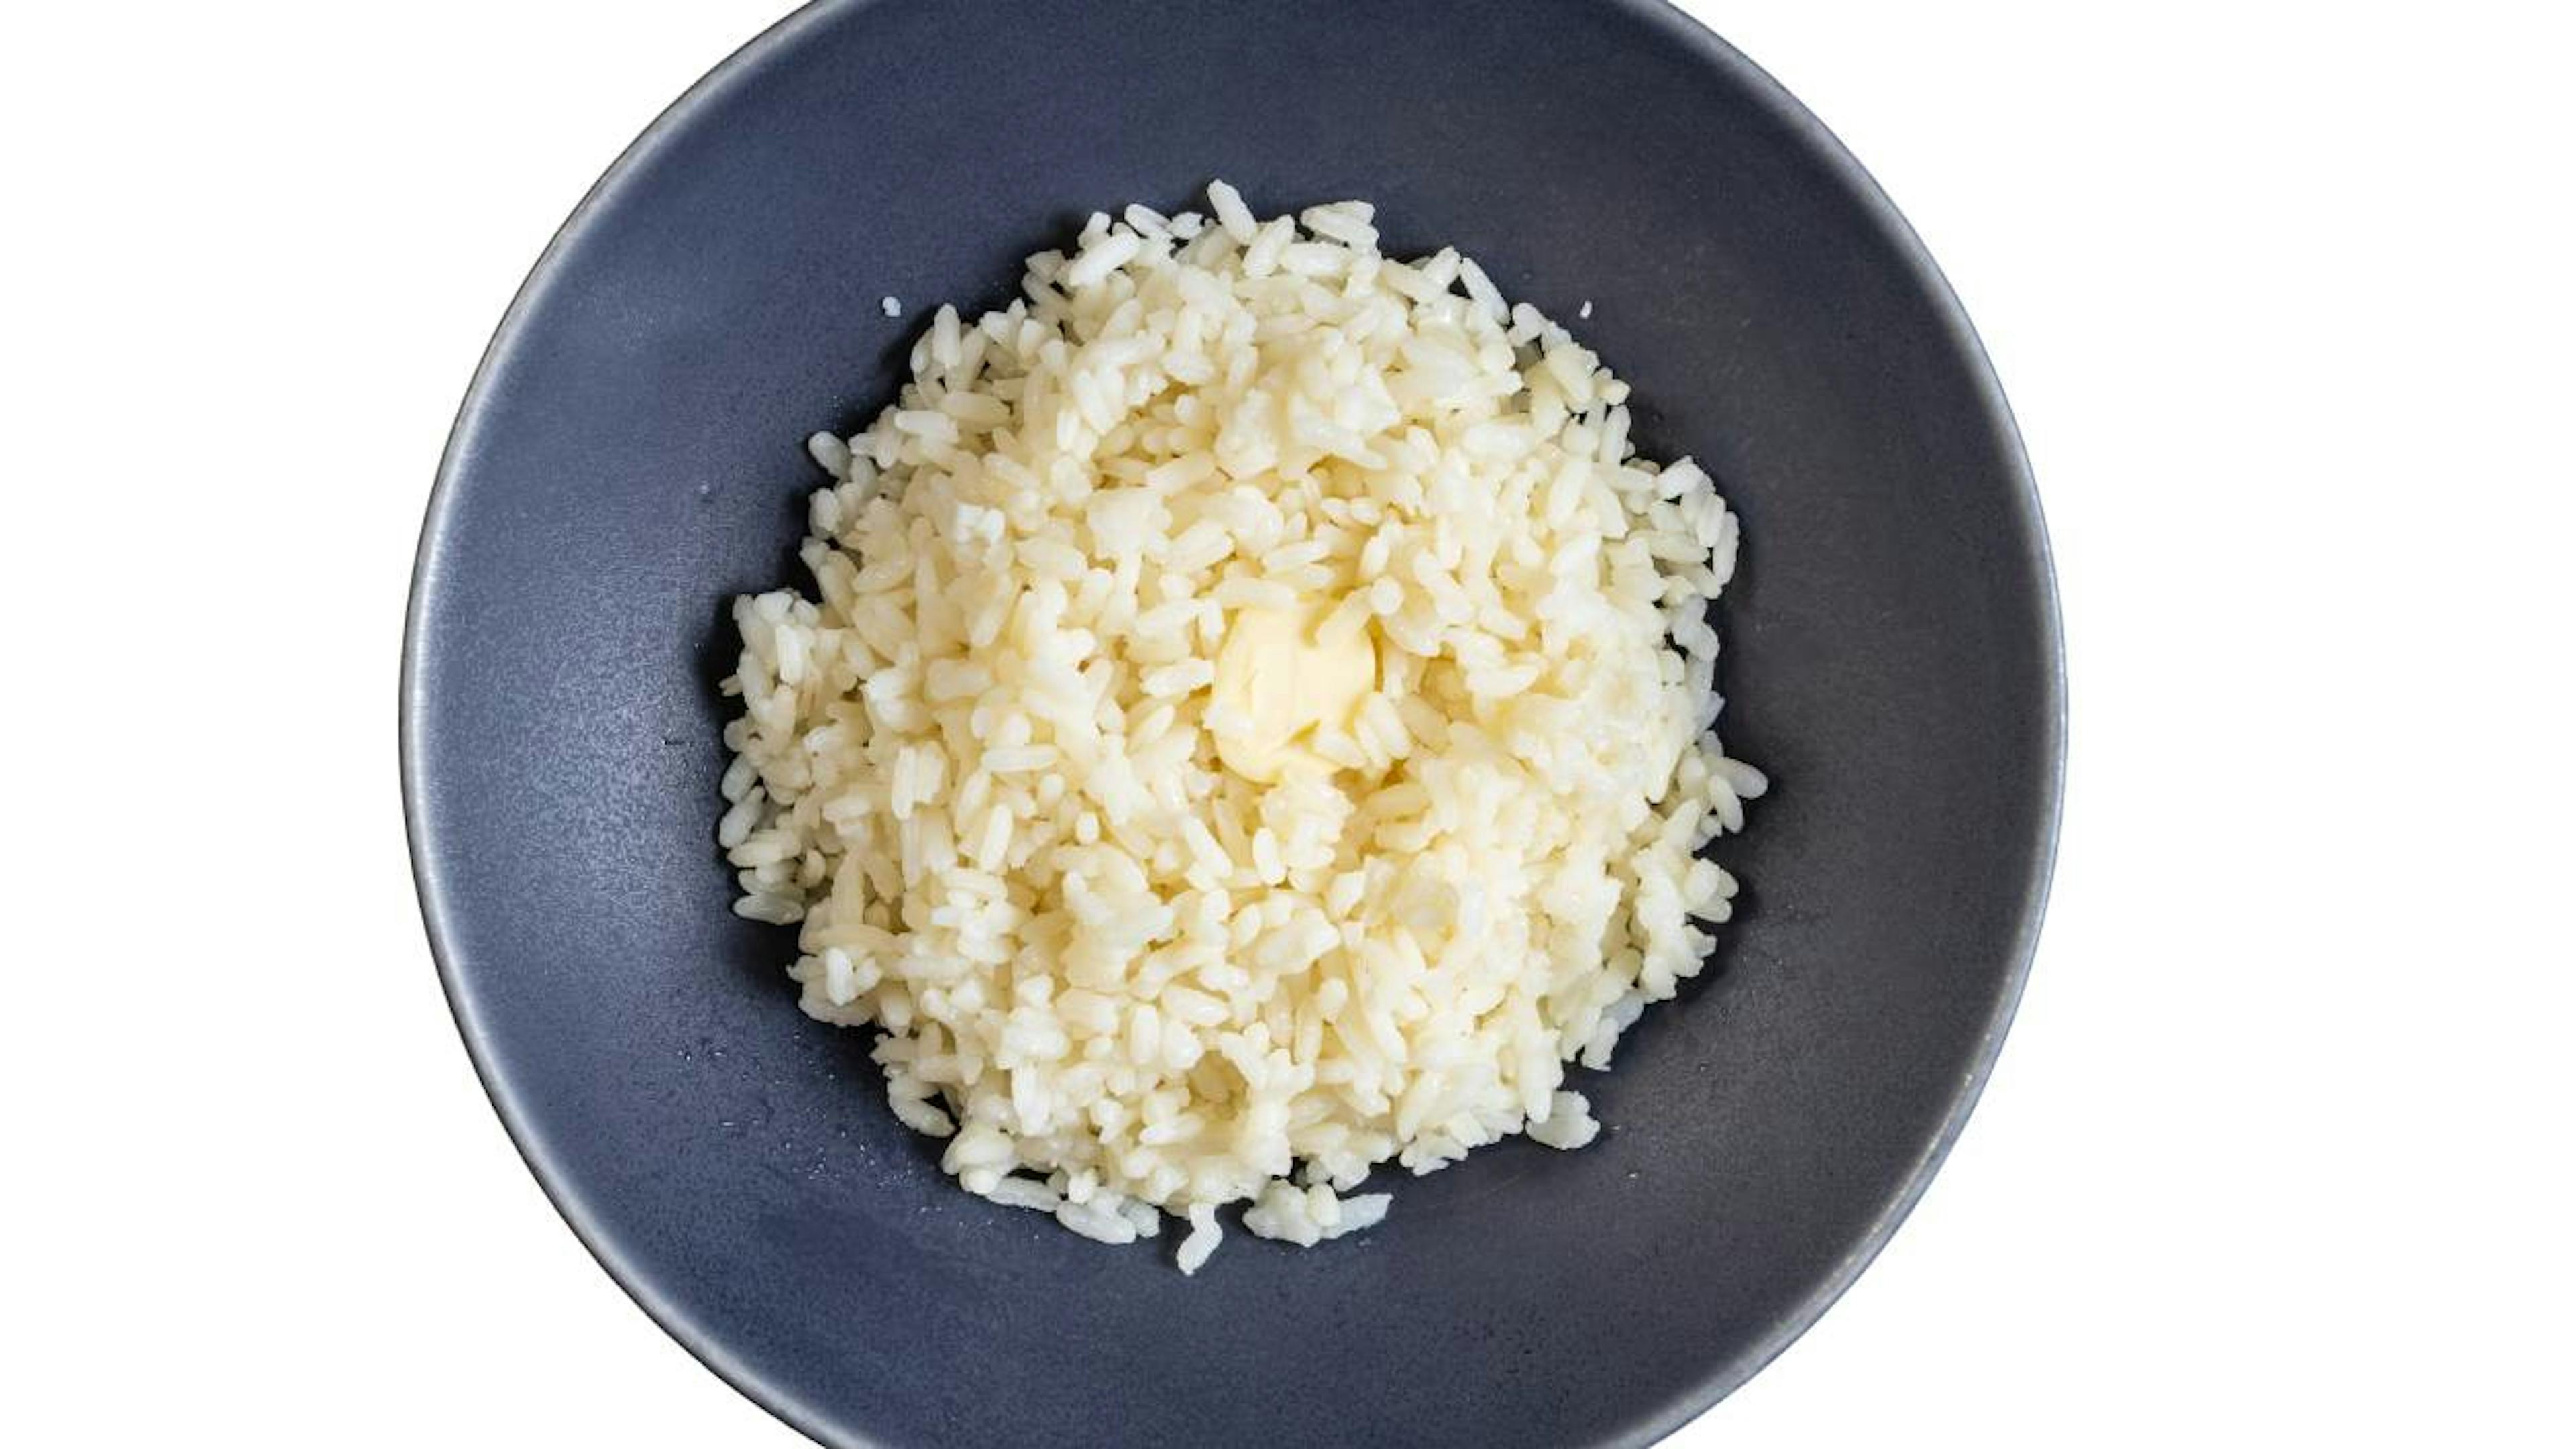 A dish of cagnone-style rice